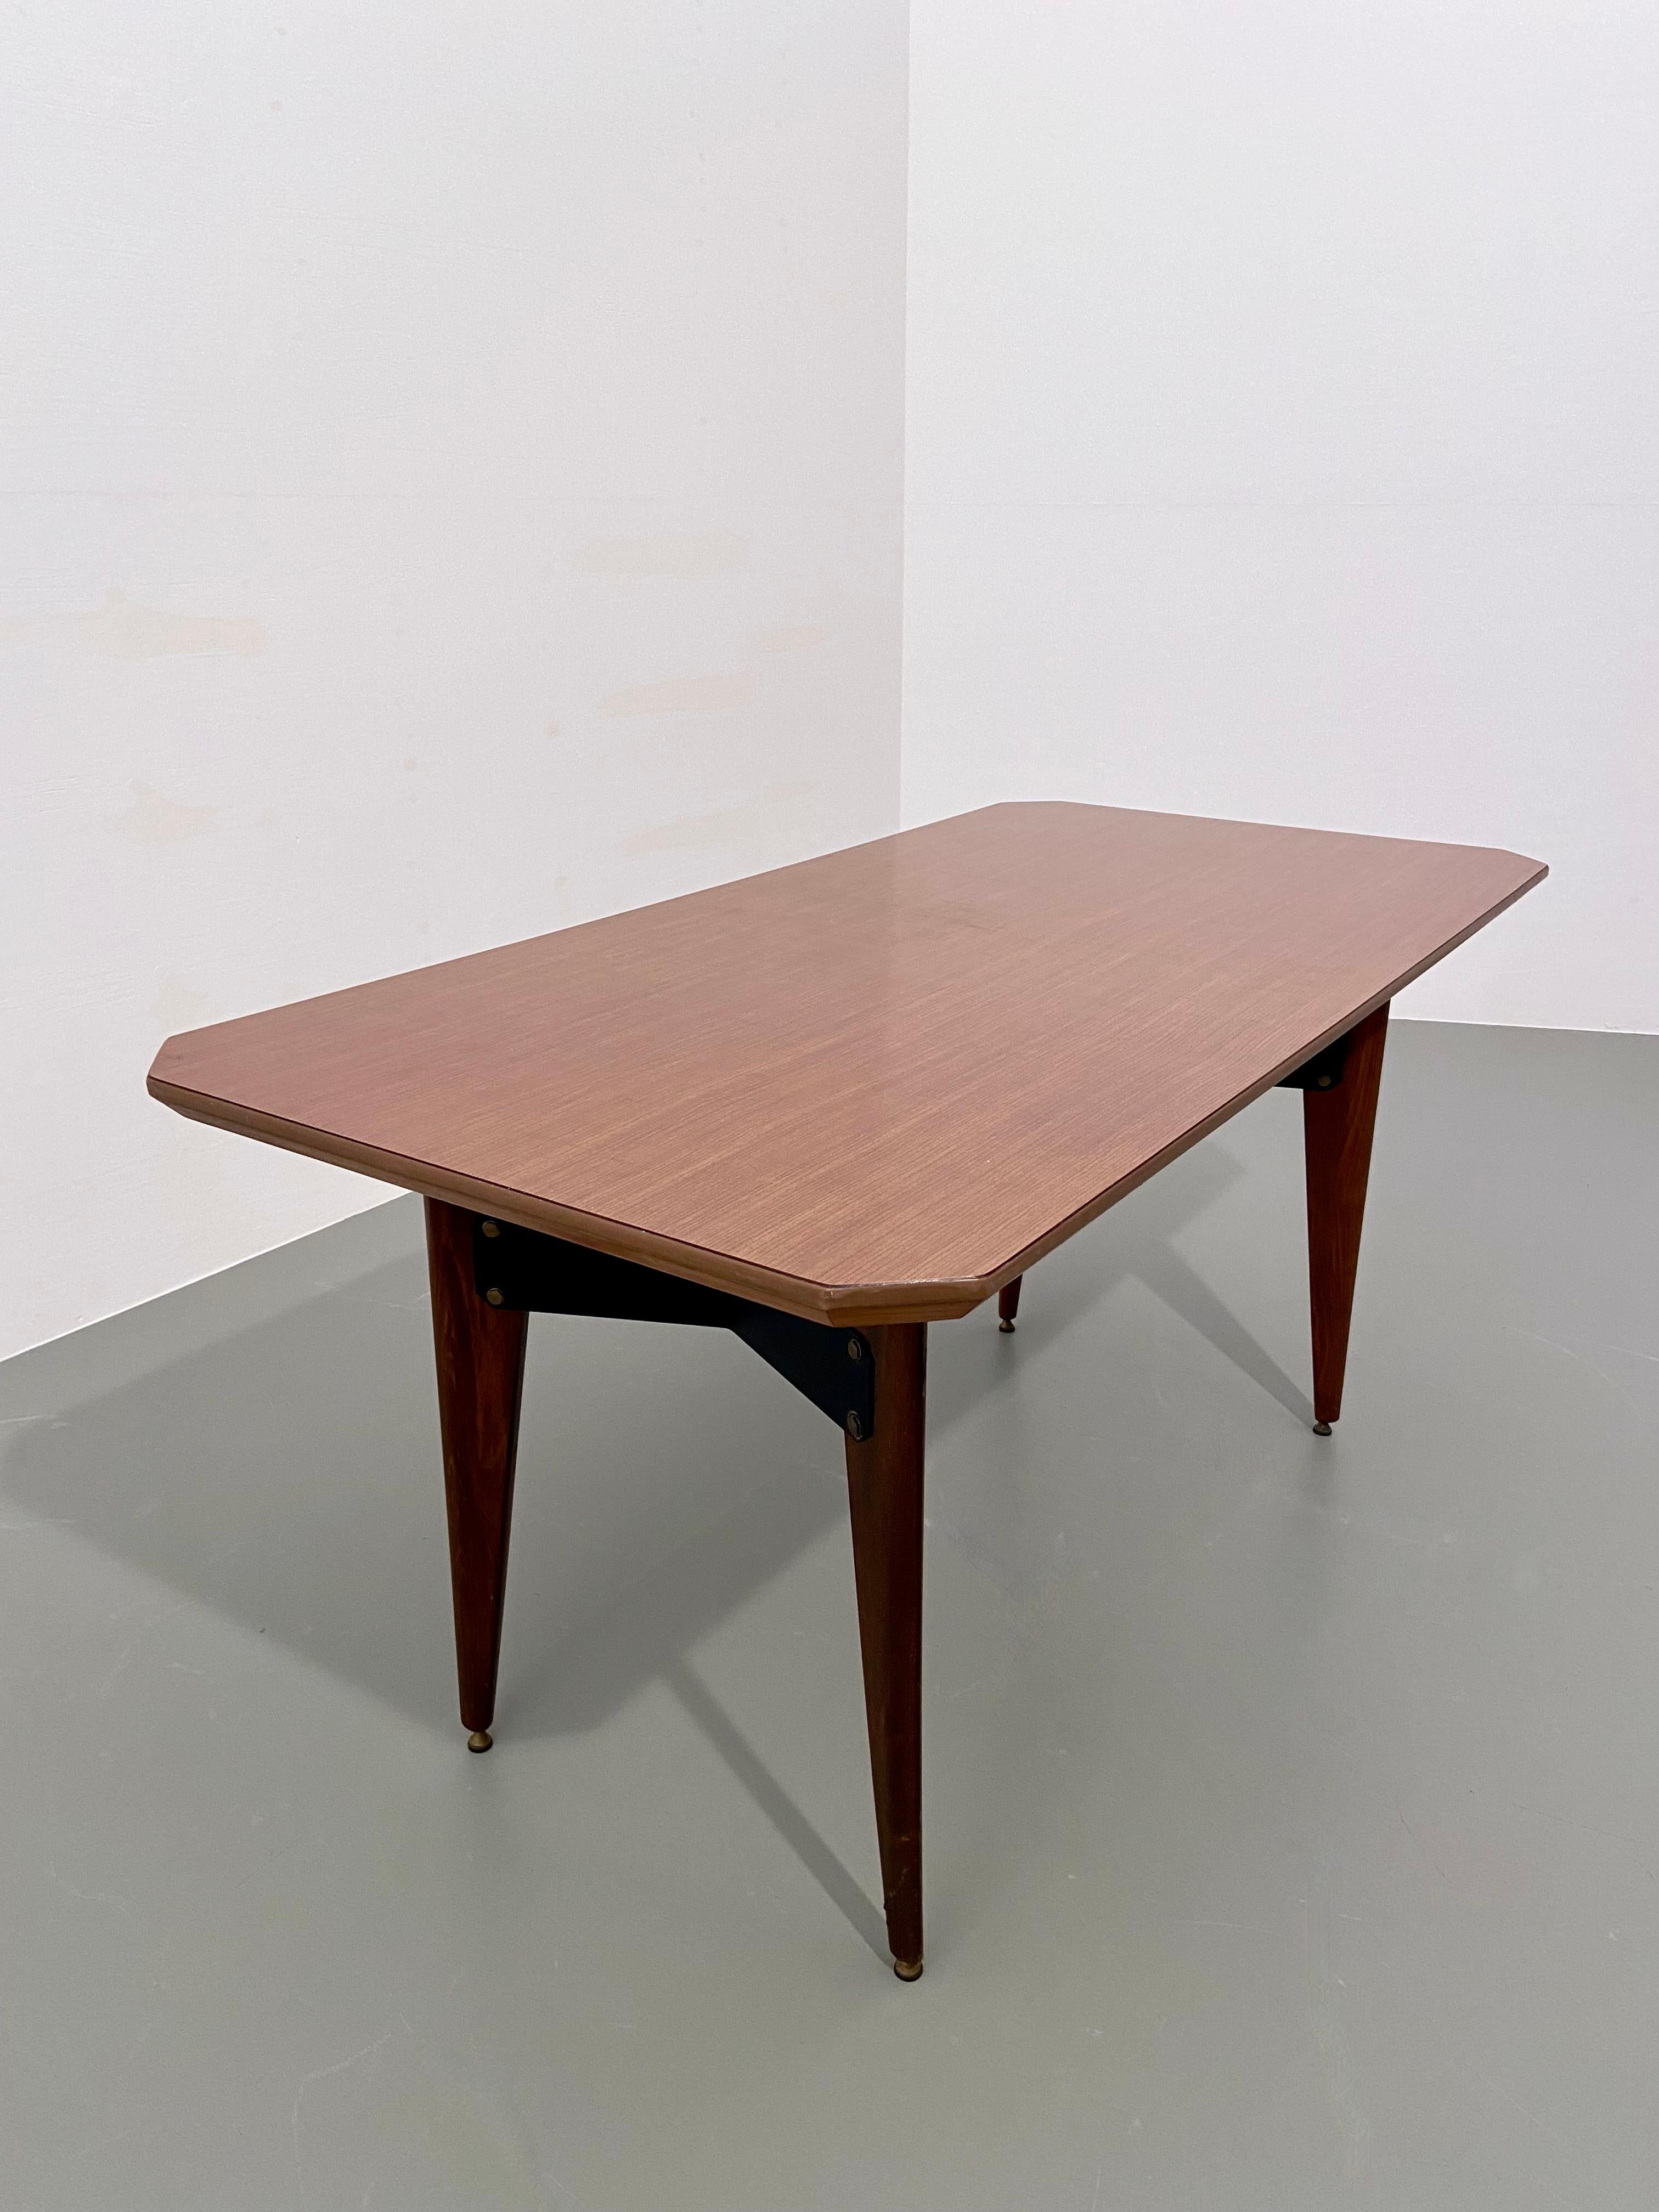 Italian Carlo Ratti Dining Table in Wood and Metal, Italy, 1960's For Sale